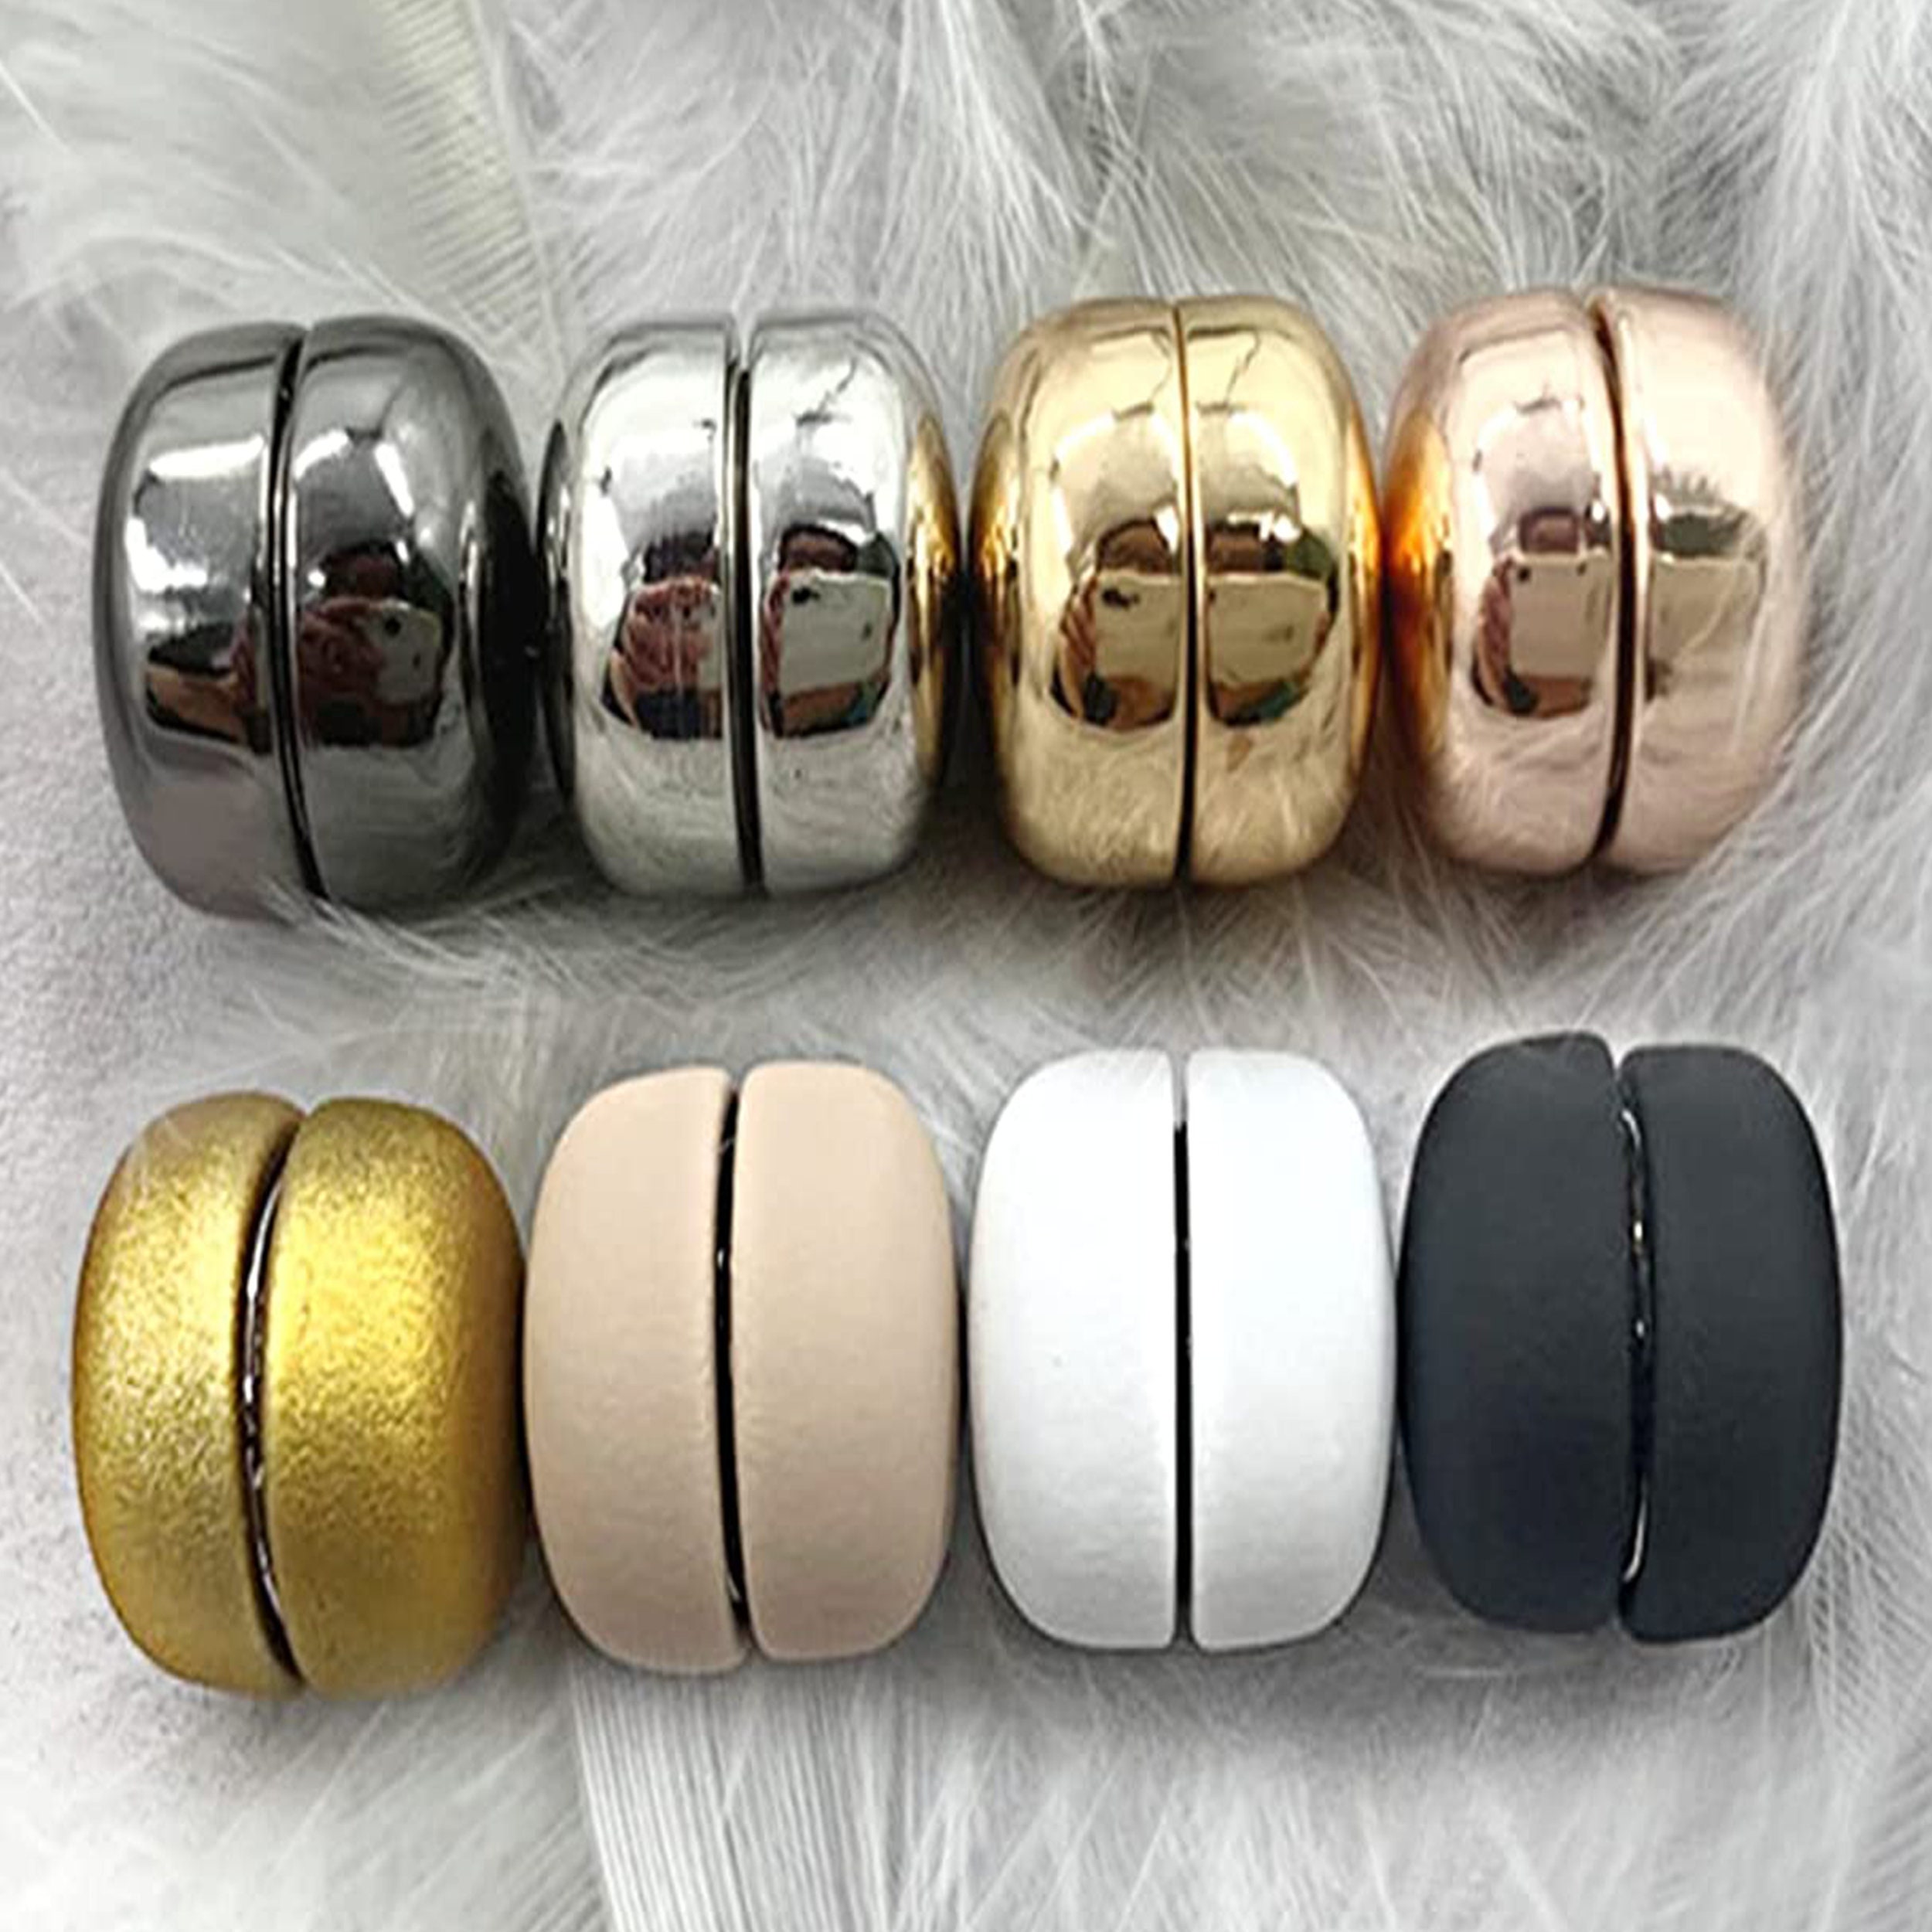 Hijab Magnetic Pin Round Magnetic Hijab Pins Buttons Multi Use Hijab  Magnets for Women Scarf Knitwear Hats Lapel Safety, 12 Colors